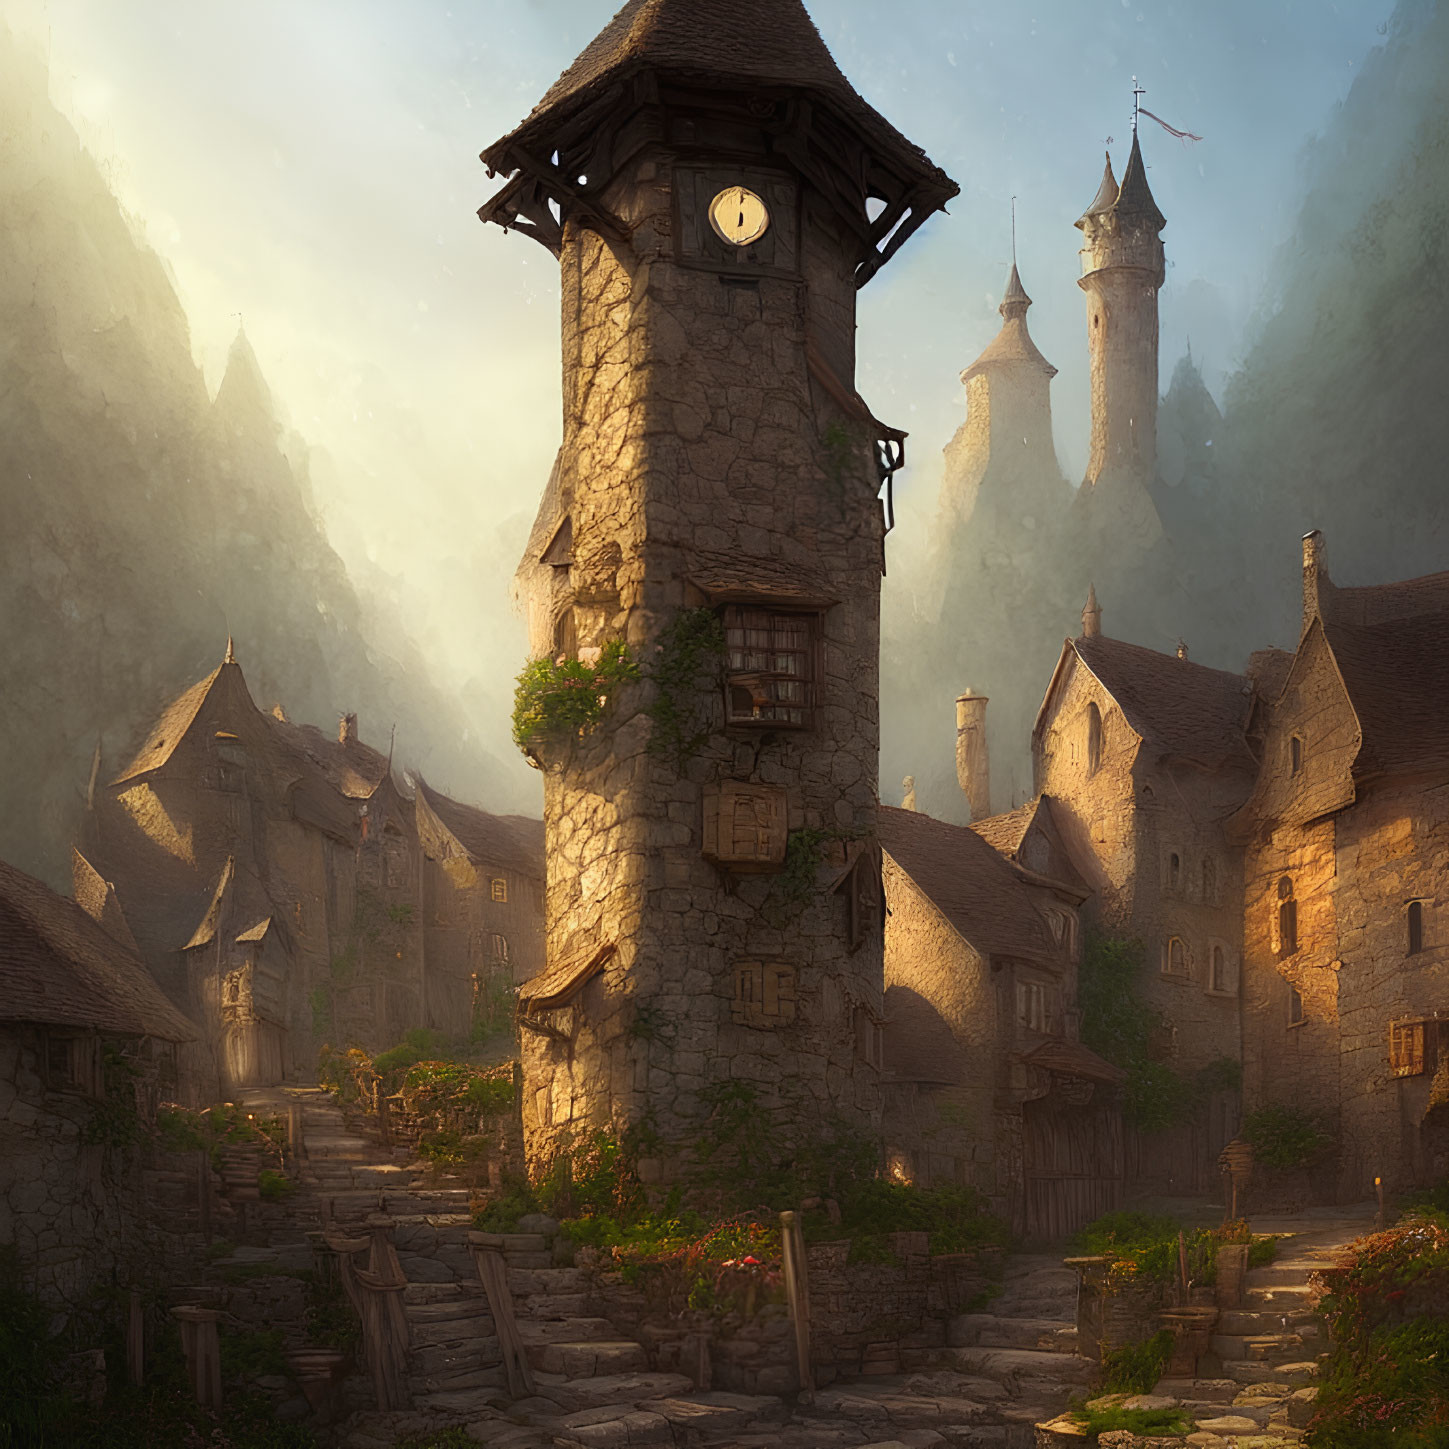 Medieval village with clock tower, stone houses & misty mountains